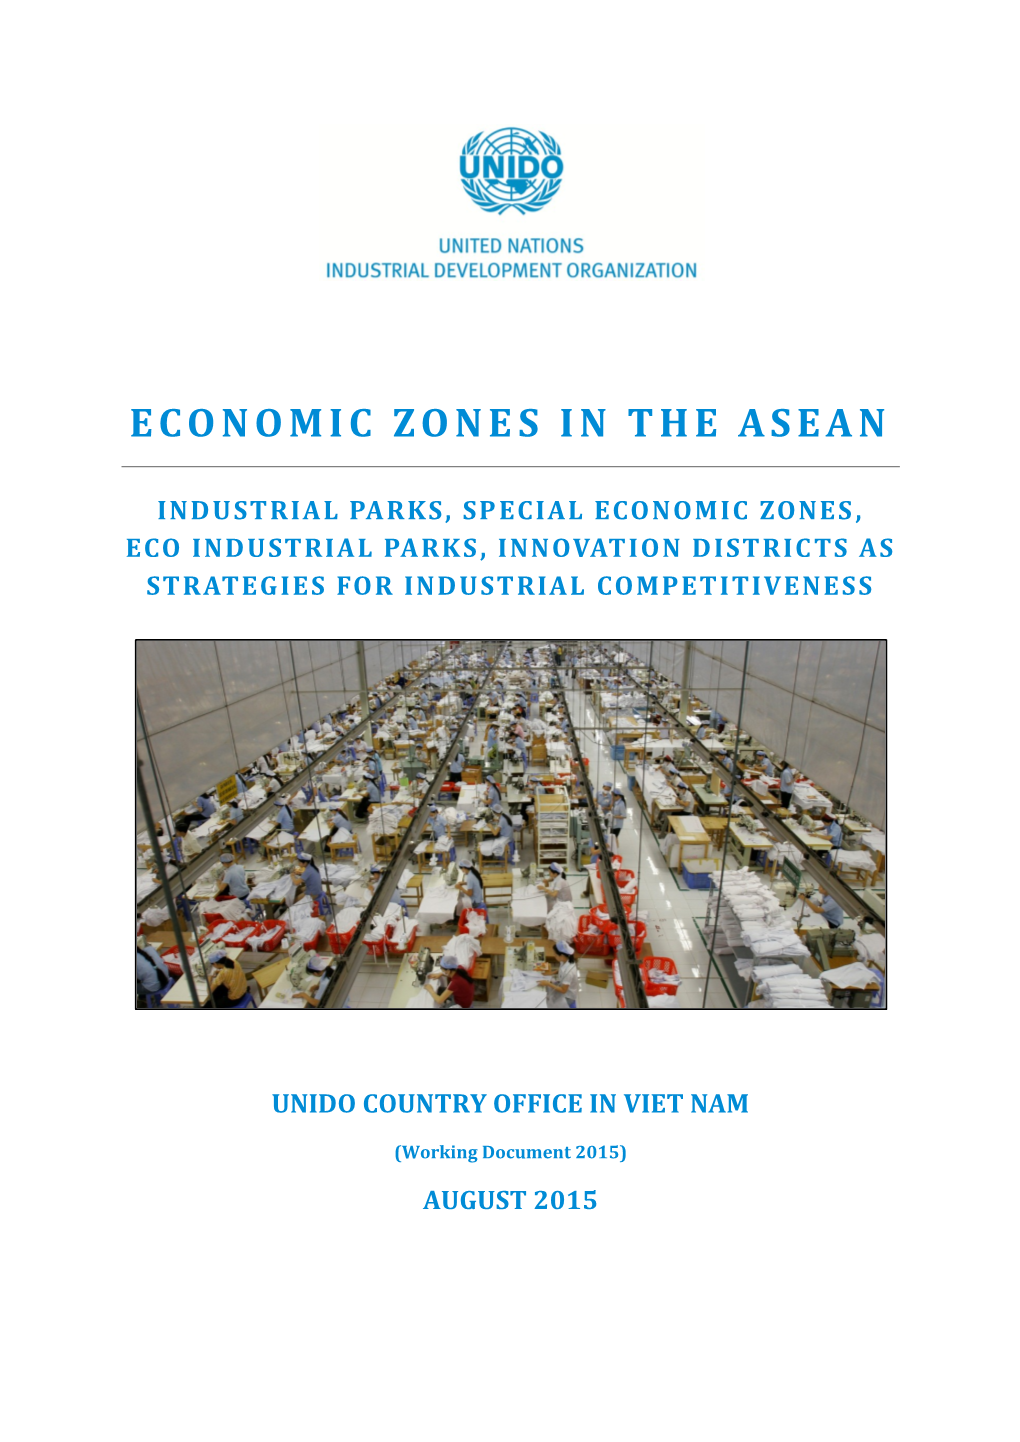 Economic Zones in the ASEAN (893 Industrial Parks, 84 Special Economic Zones, 2 Eco-Industrial Parks, 25 Technology Parks, and 1 Innovation District)